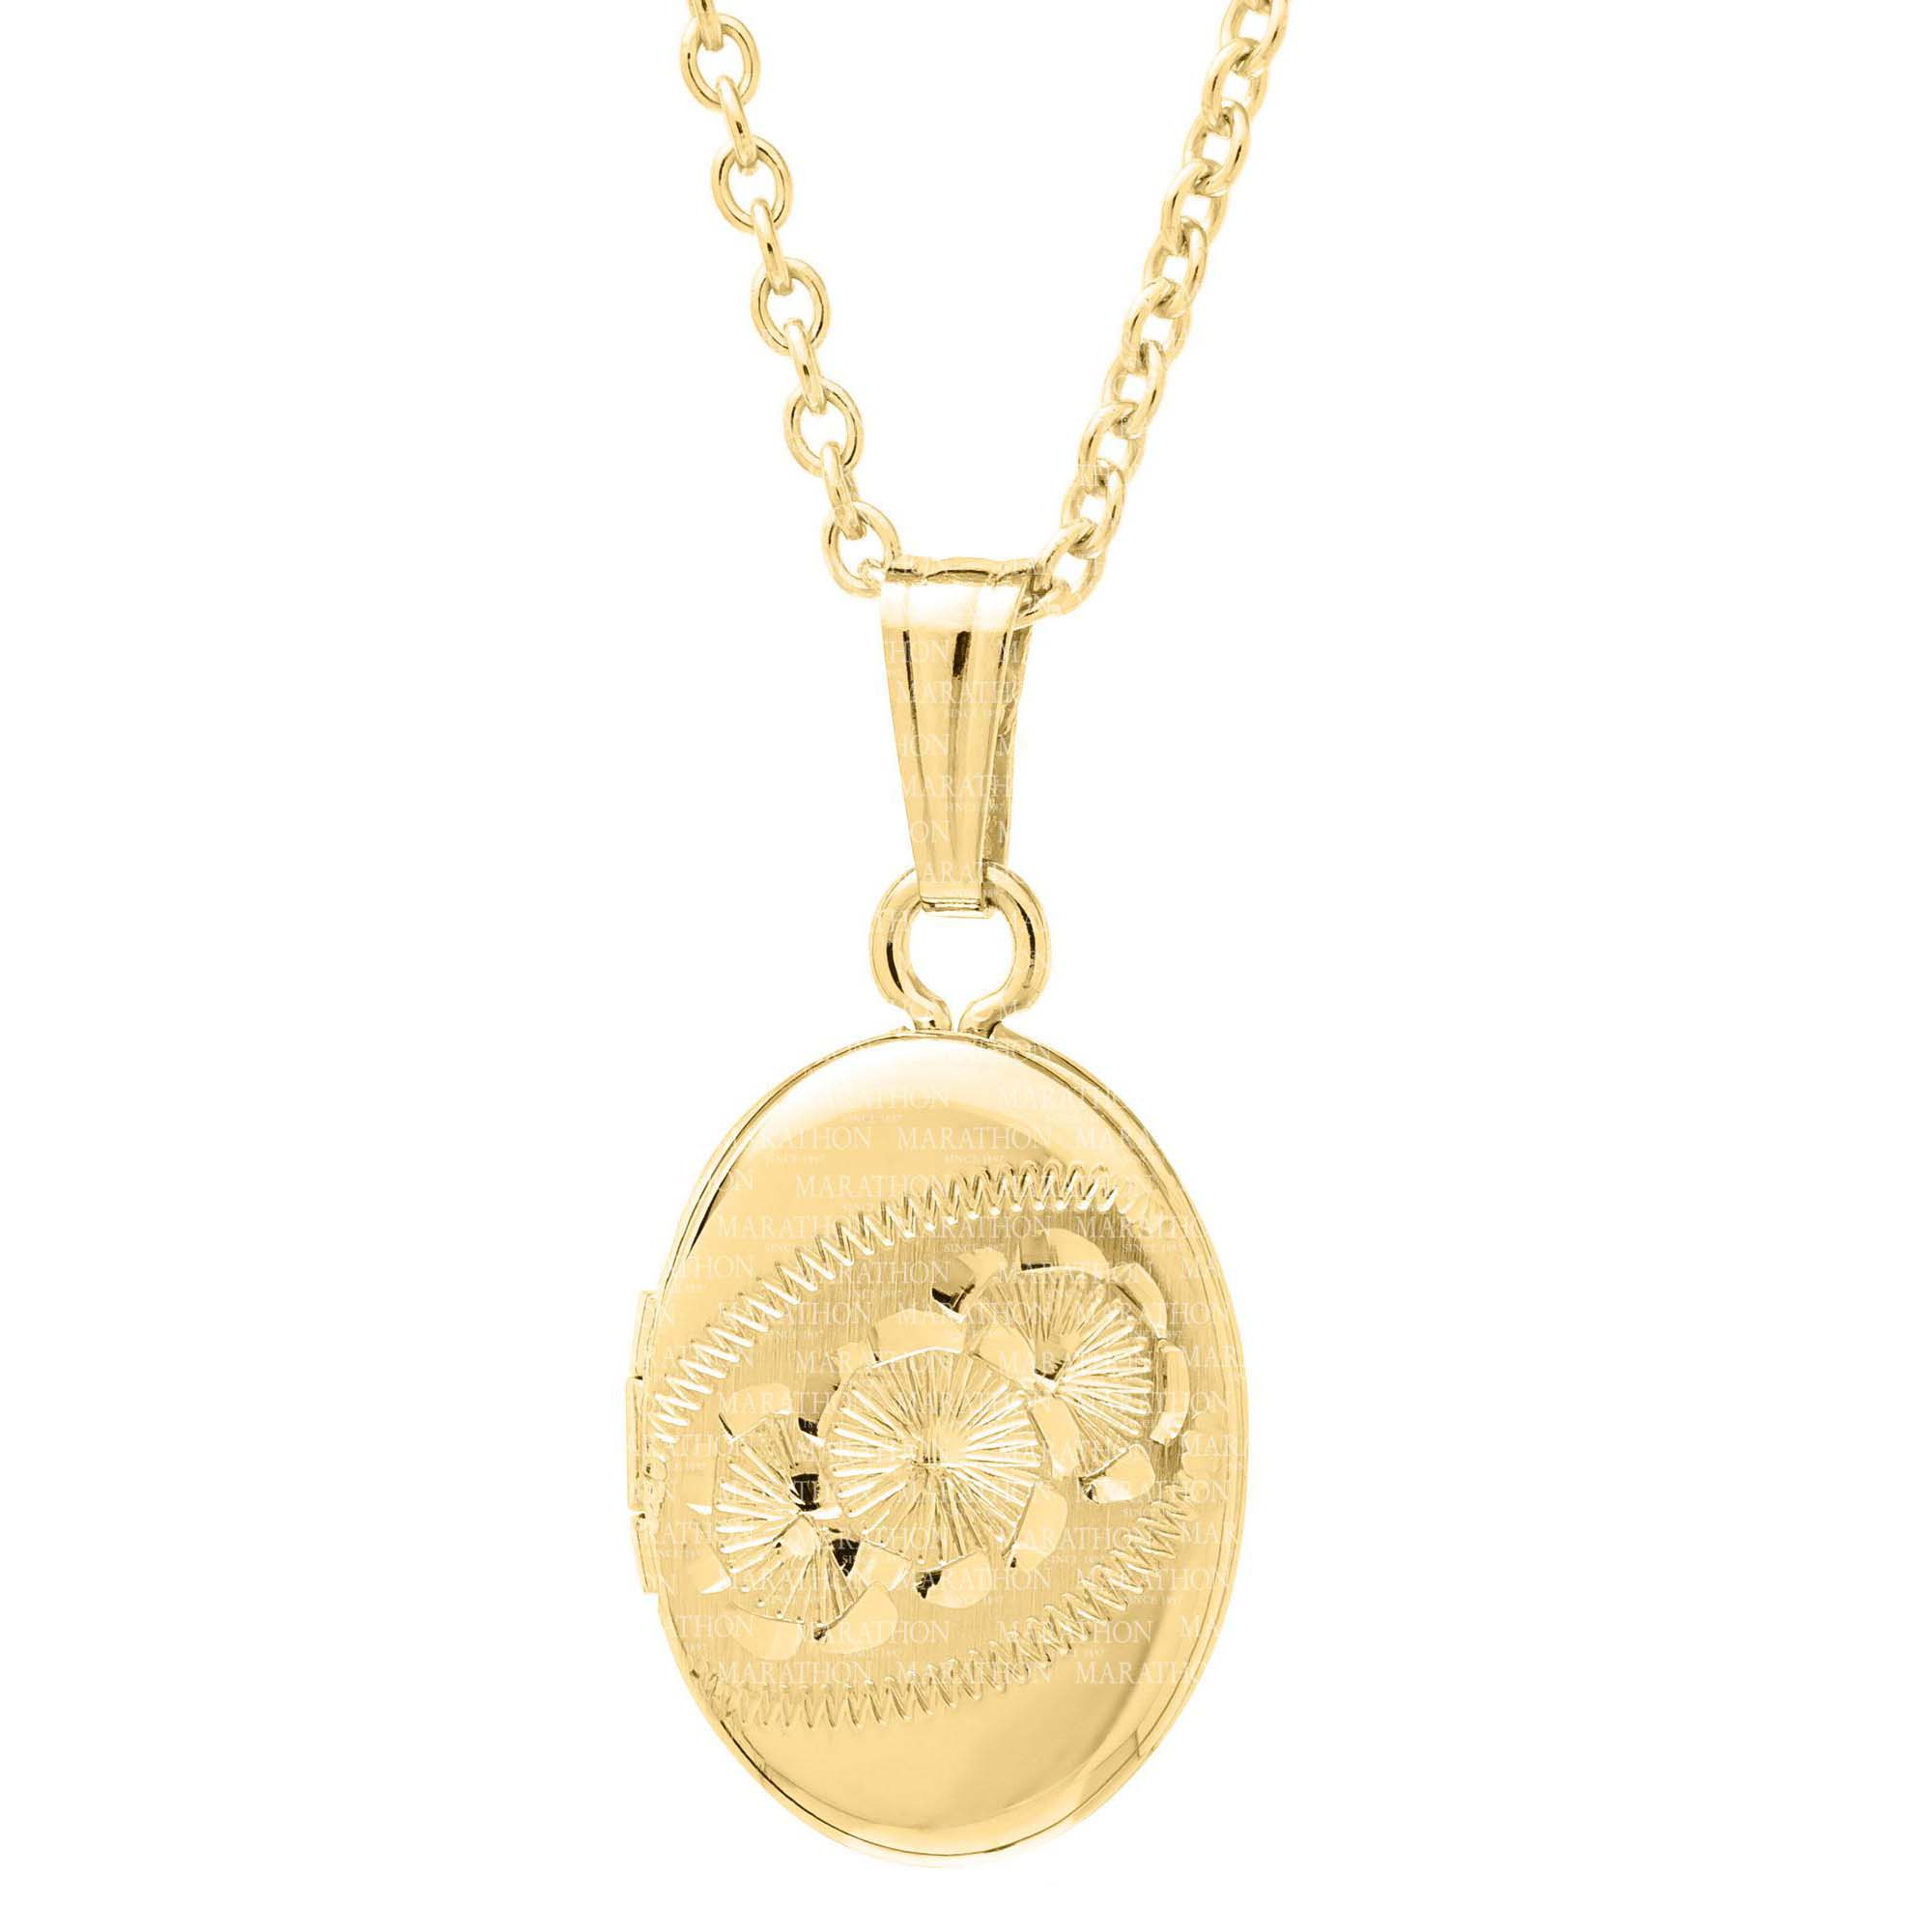 14K Gold-Filled Floral Oval Kids Pendant. 10x20mm. 15" chain. #12375